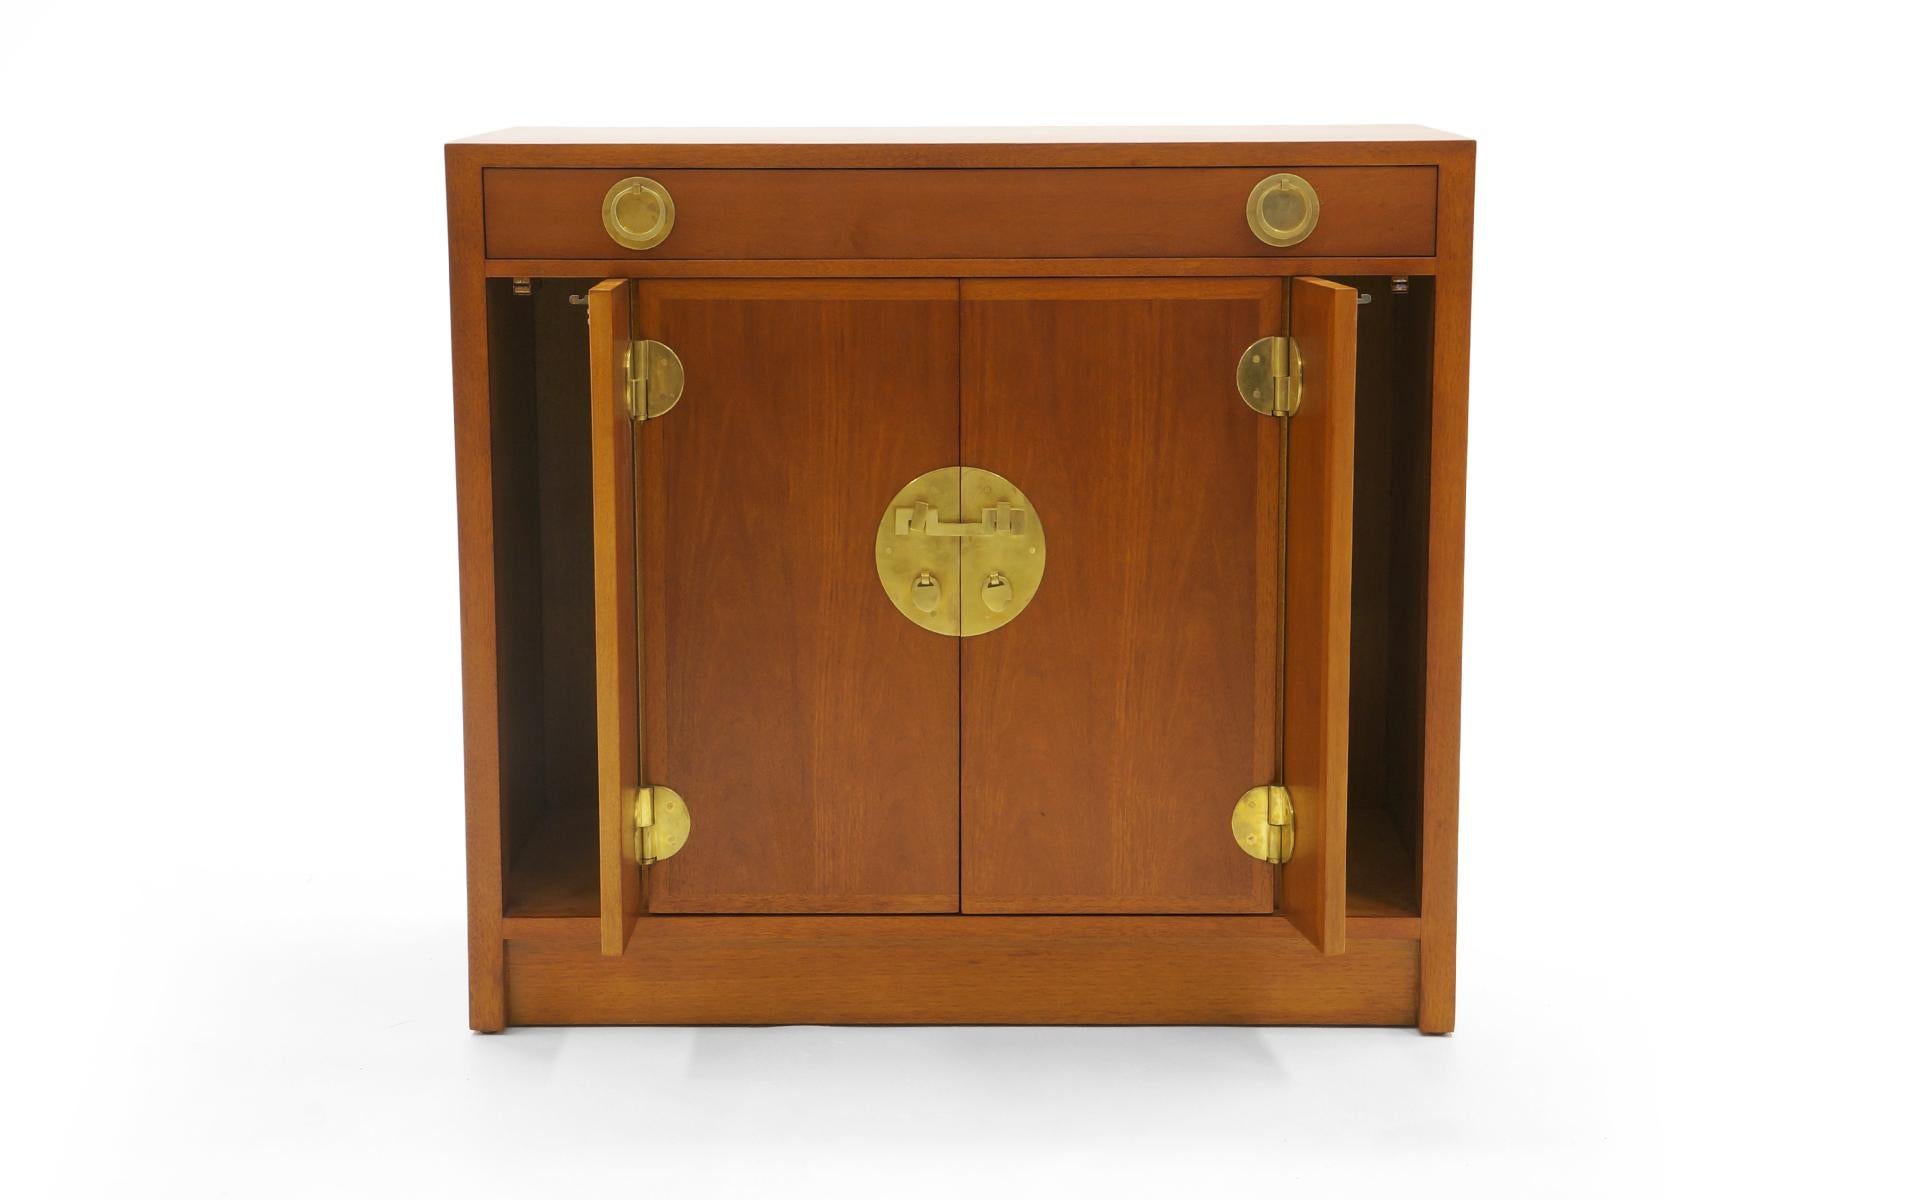 Storage chest or cabinet designed by Edward Wormley for Dunbar. Expertly refinished mahogany case with solid brass hardware. Two wide center drawers reveal an adjustable shelf. Two outer doors have the push and click opening mechanism. One wide